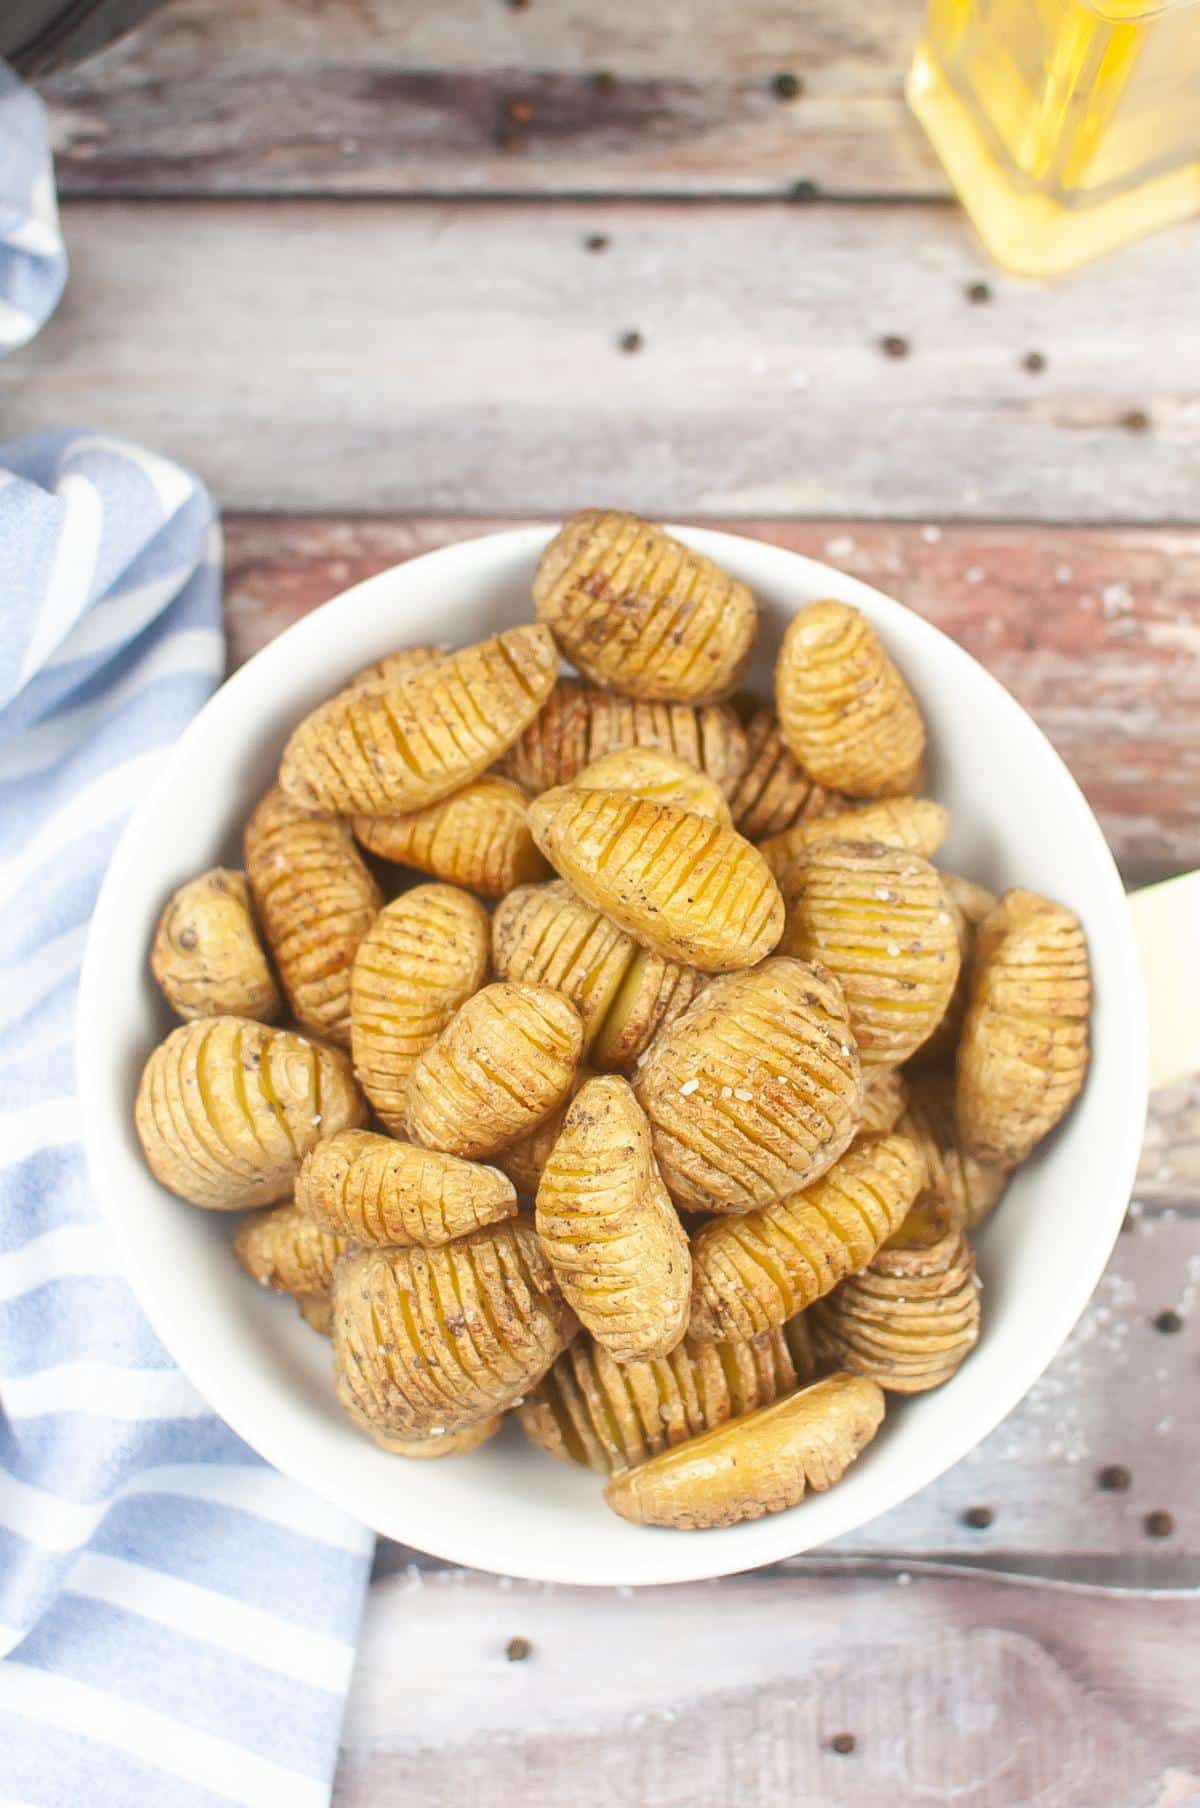 Hasselback potatoes in a white bowl on a wooden table.